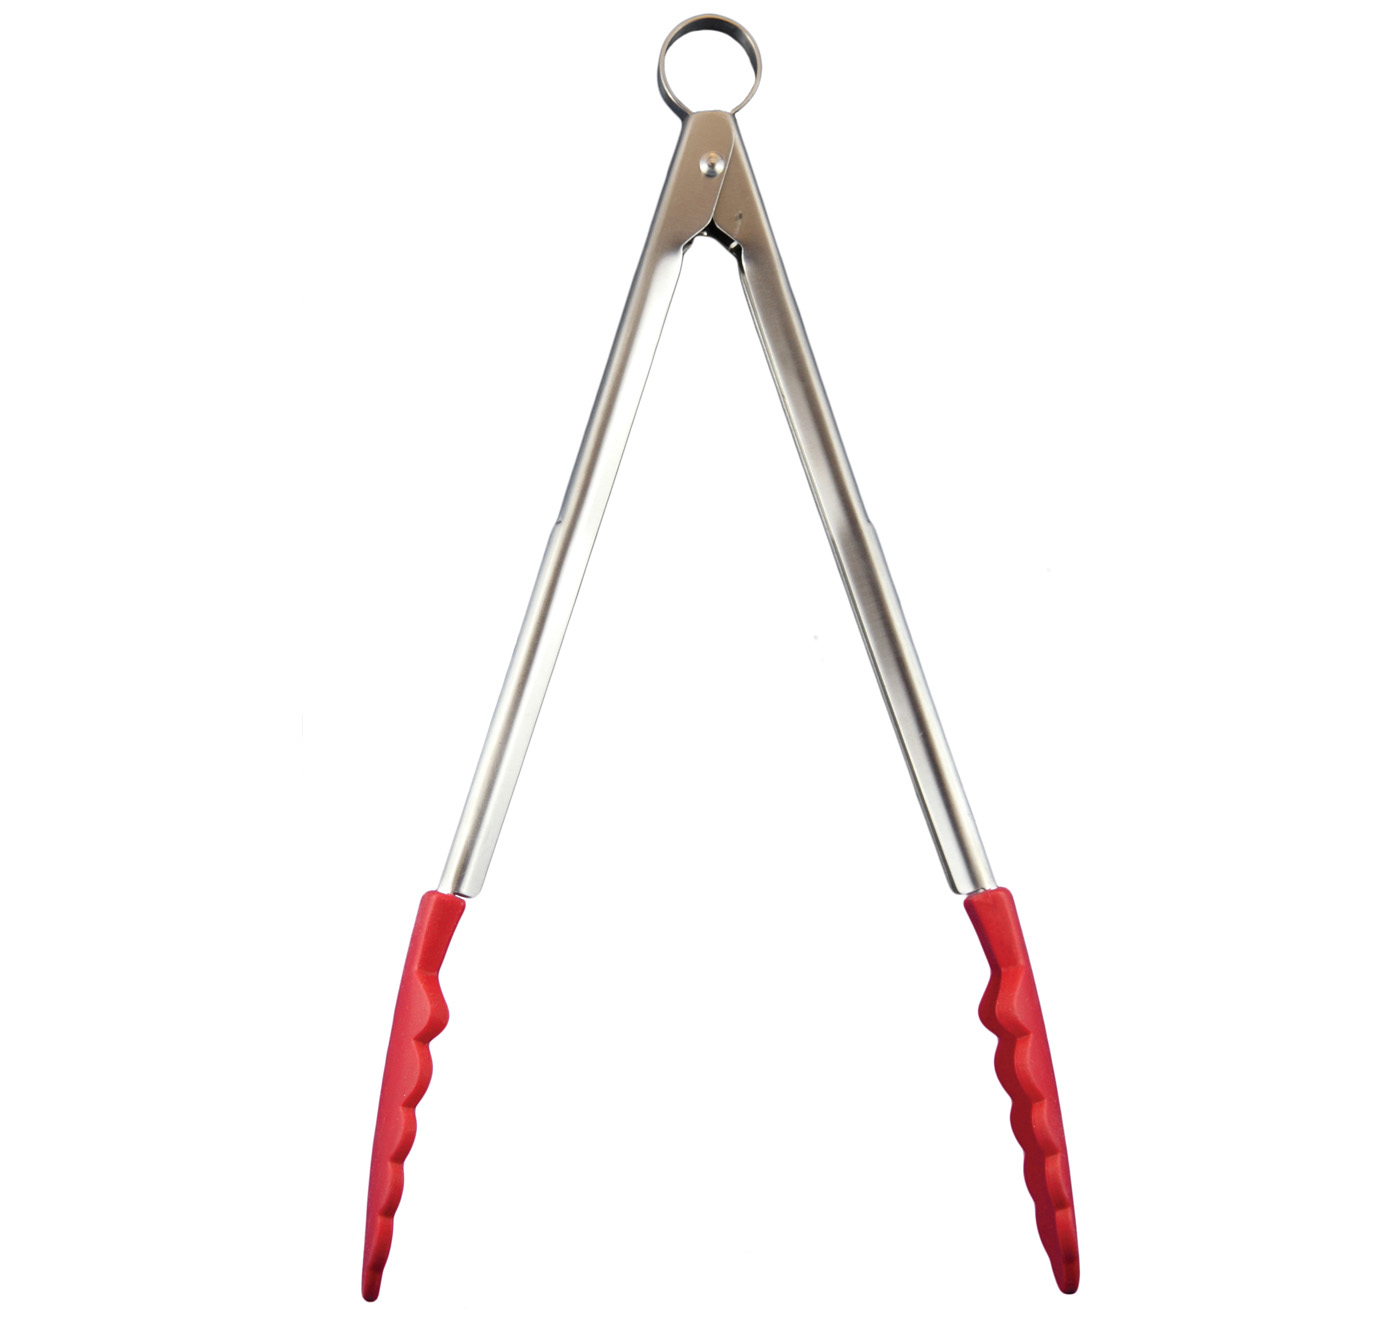 Cuisipro 12 Inch Stainless Steel Silicone Locking Tongs, Red - image 1 of 2